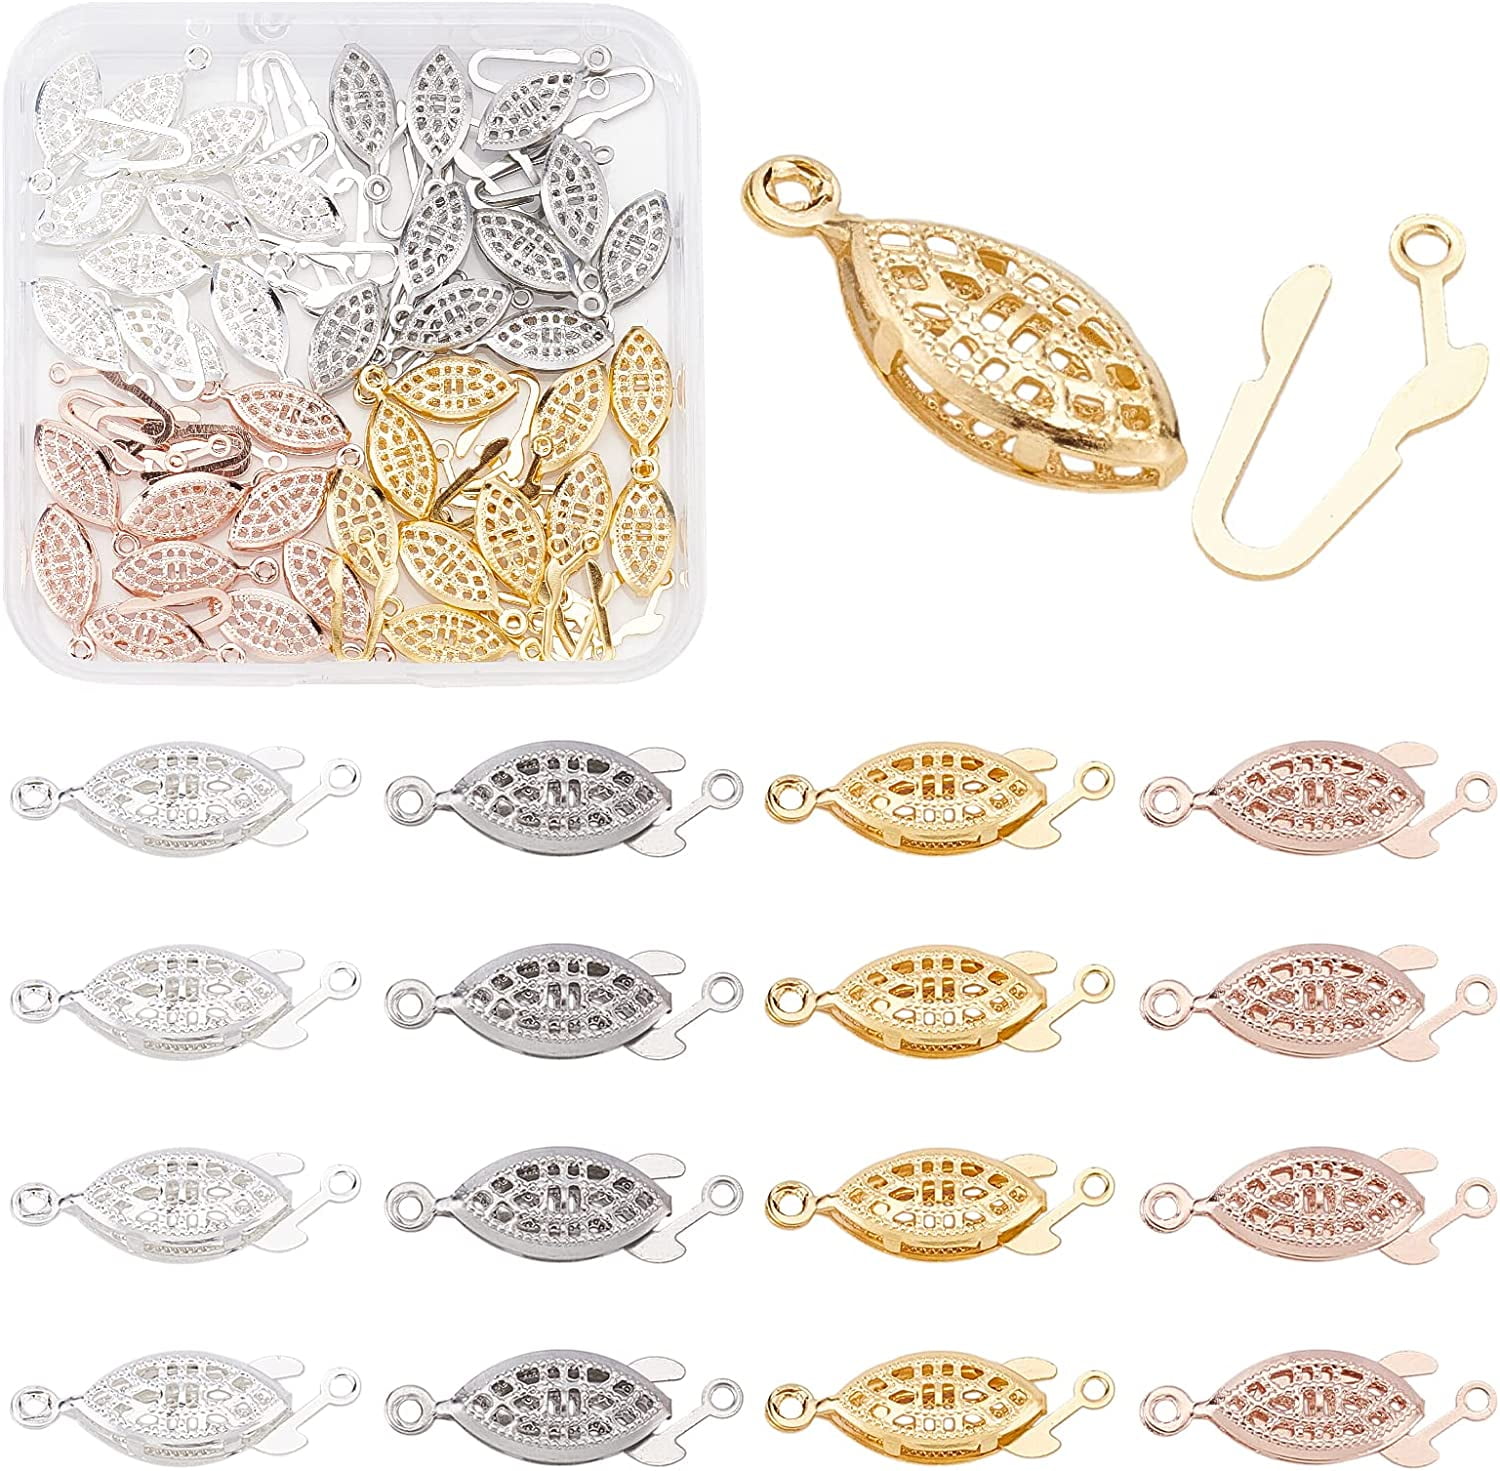  4 Piece Pearl Filigree Necklace Clasp Oval Filigree Fish Hook  Clasp Jewelry Slide Clasps Bracelet Connectors with Storage Box for Layered  Necklaces, Jewelry, Crafts Bracelets, 2 Styles and 2 Colors